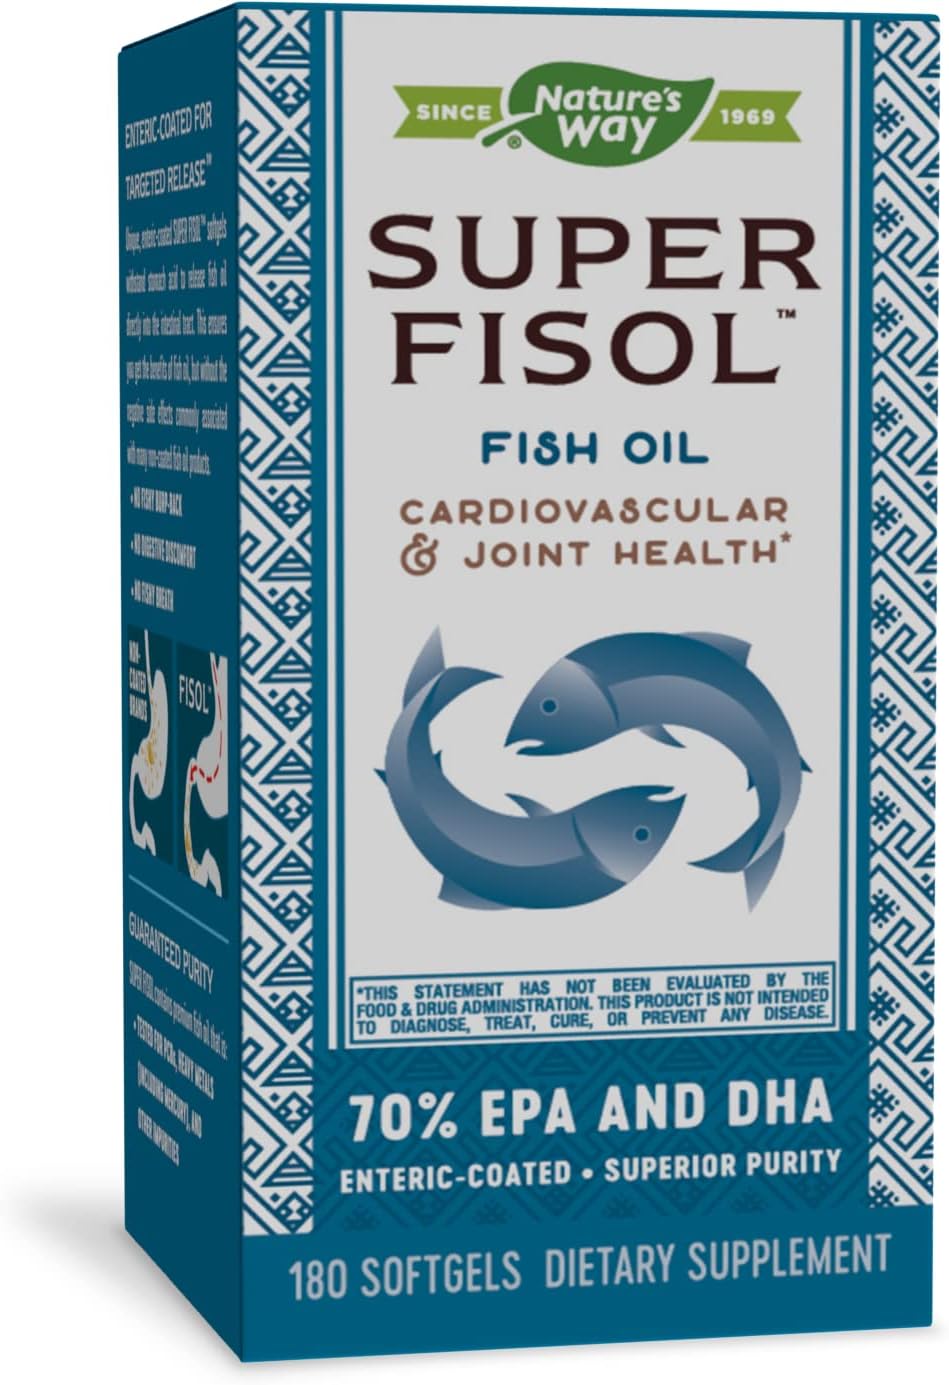 Natures Way Super Fisol Premium Fish Oil, Sustainably Sourced, Tested for PCBs, Heavy Metals, and Im